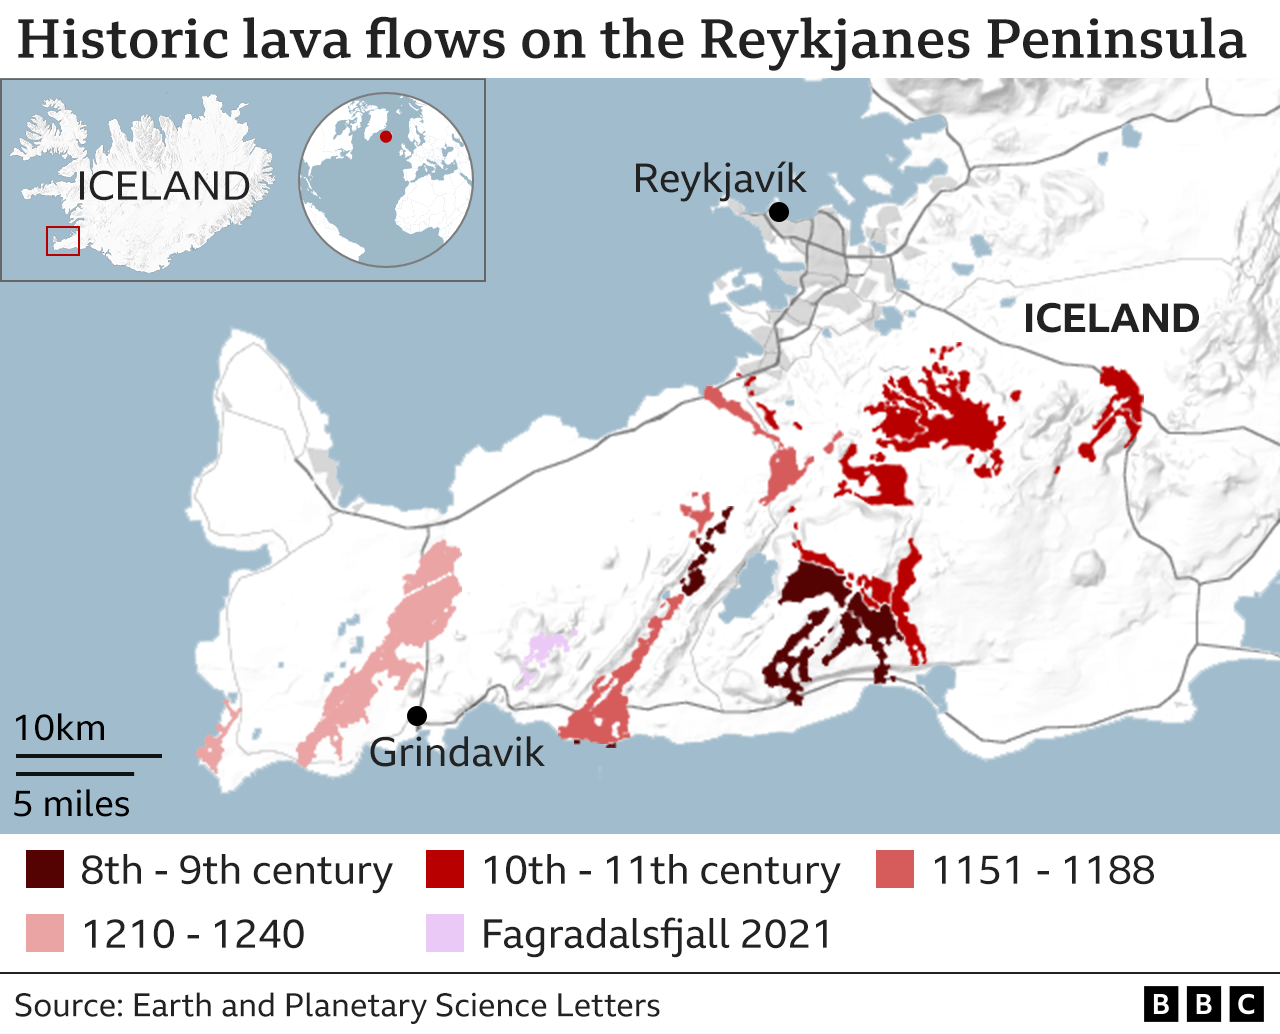 A BBC graphic titled "historic lava flows on the Reykjanes peninsula", illustrating how many flows here date back as far as the 8th Century